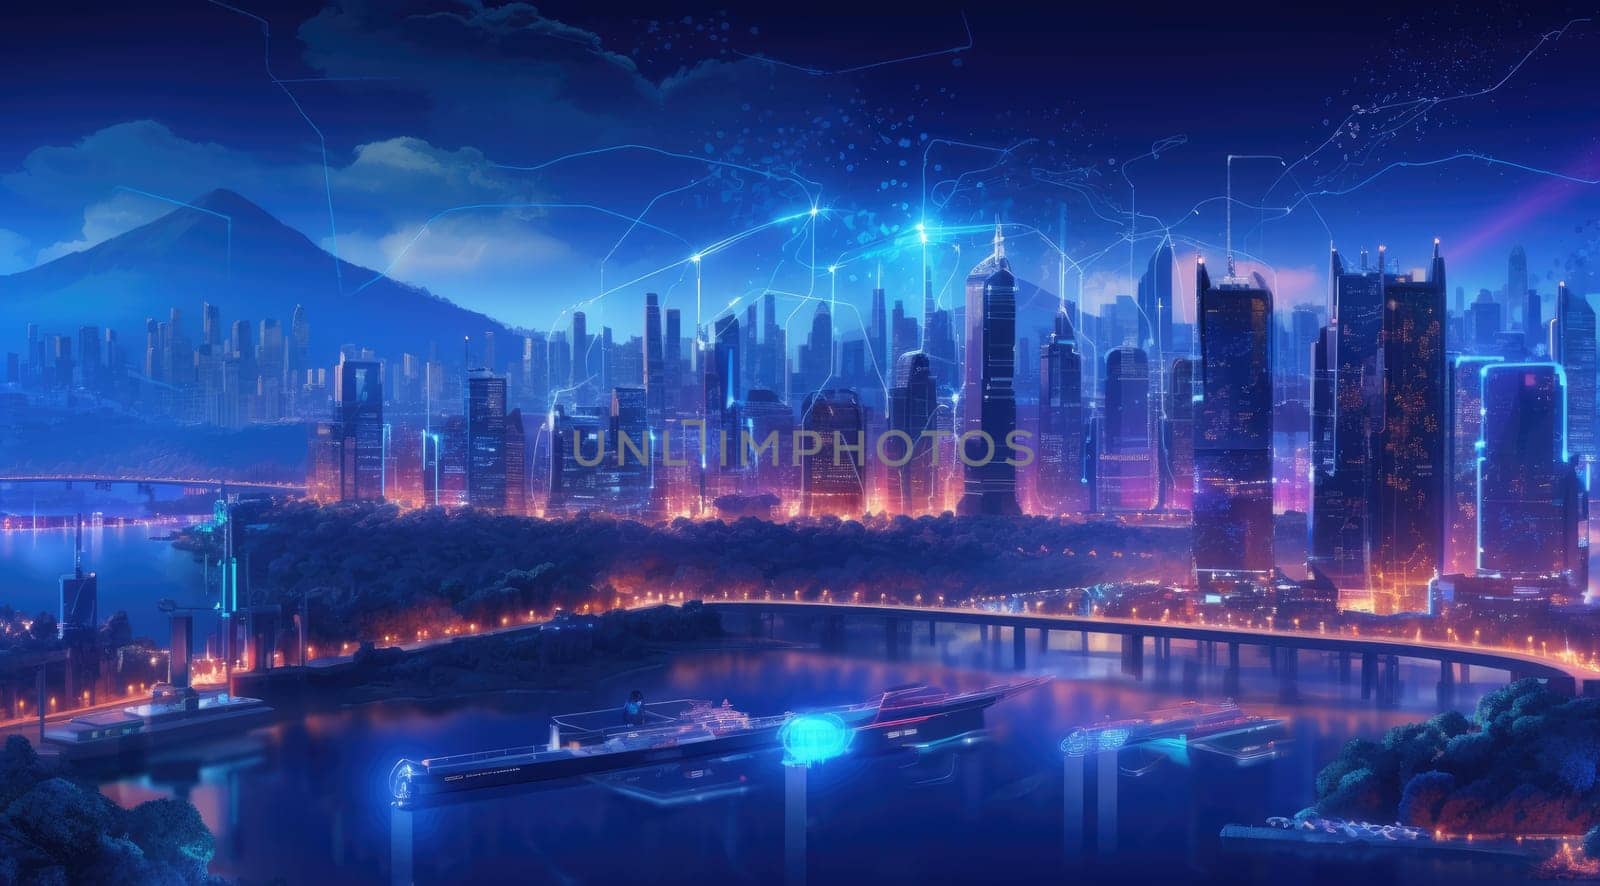 A virtual city with holograms and bright road lines. A vision for the future